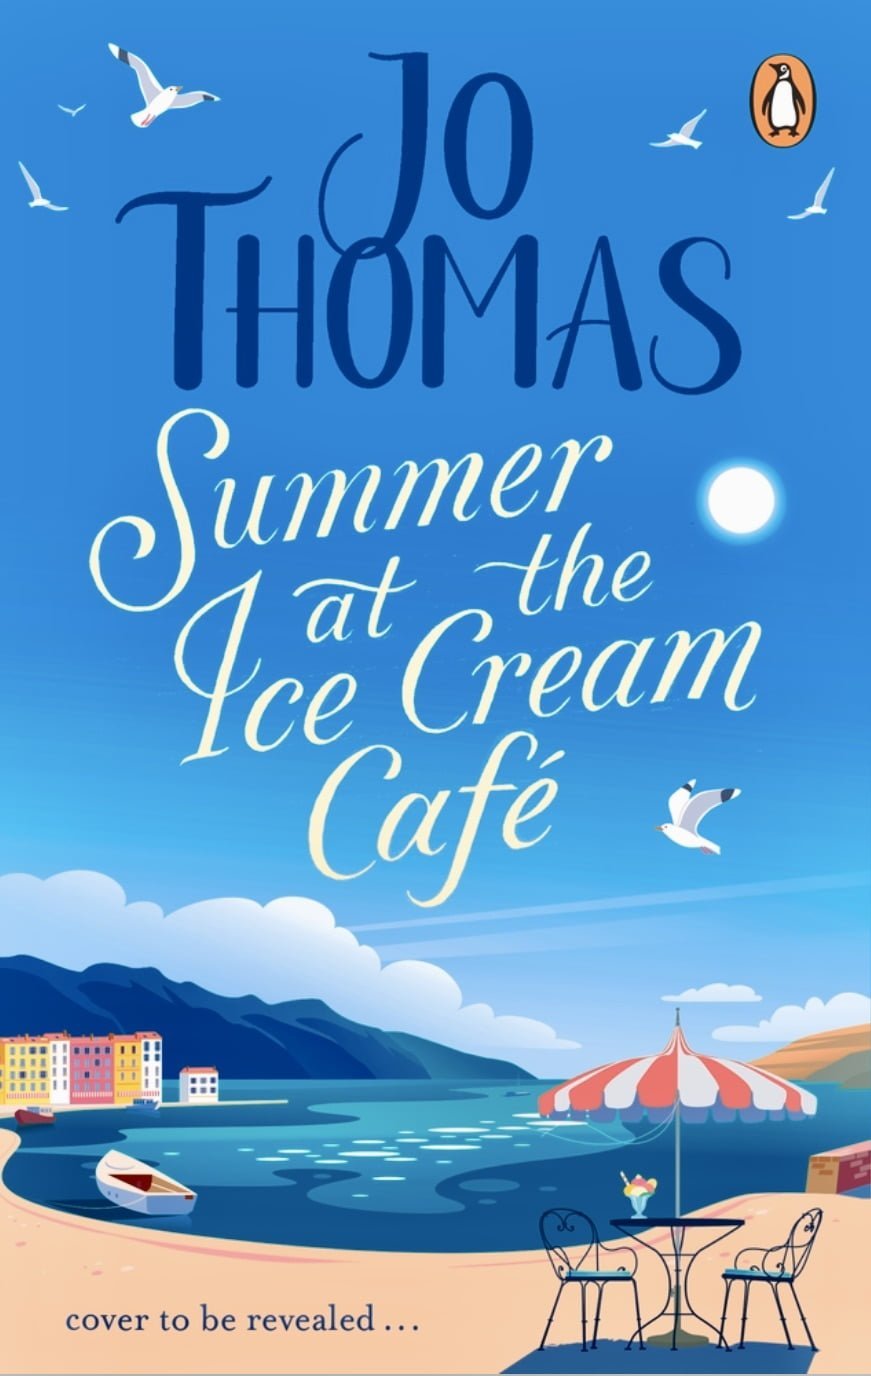 SUMMER AT THE ICE CREAM CAFE BY JO THOMAS – BOOK REVIEW